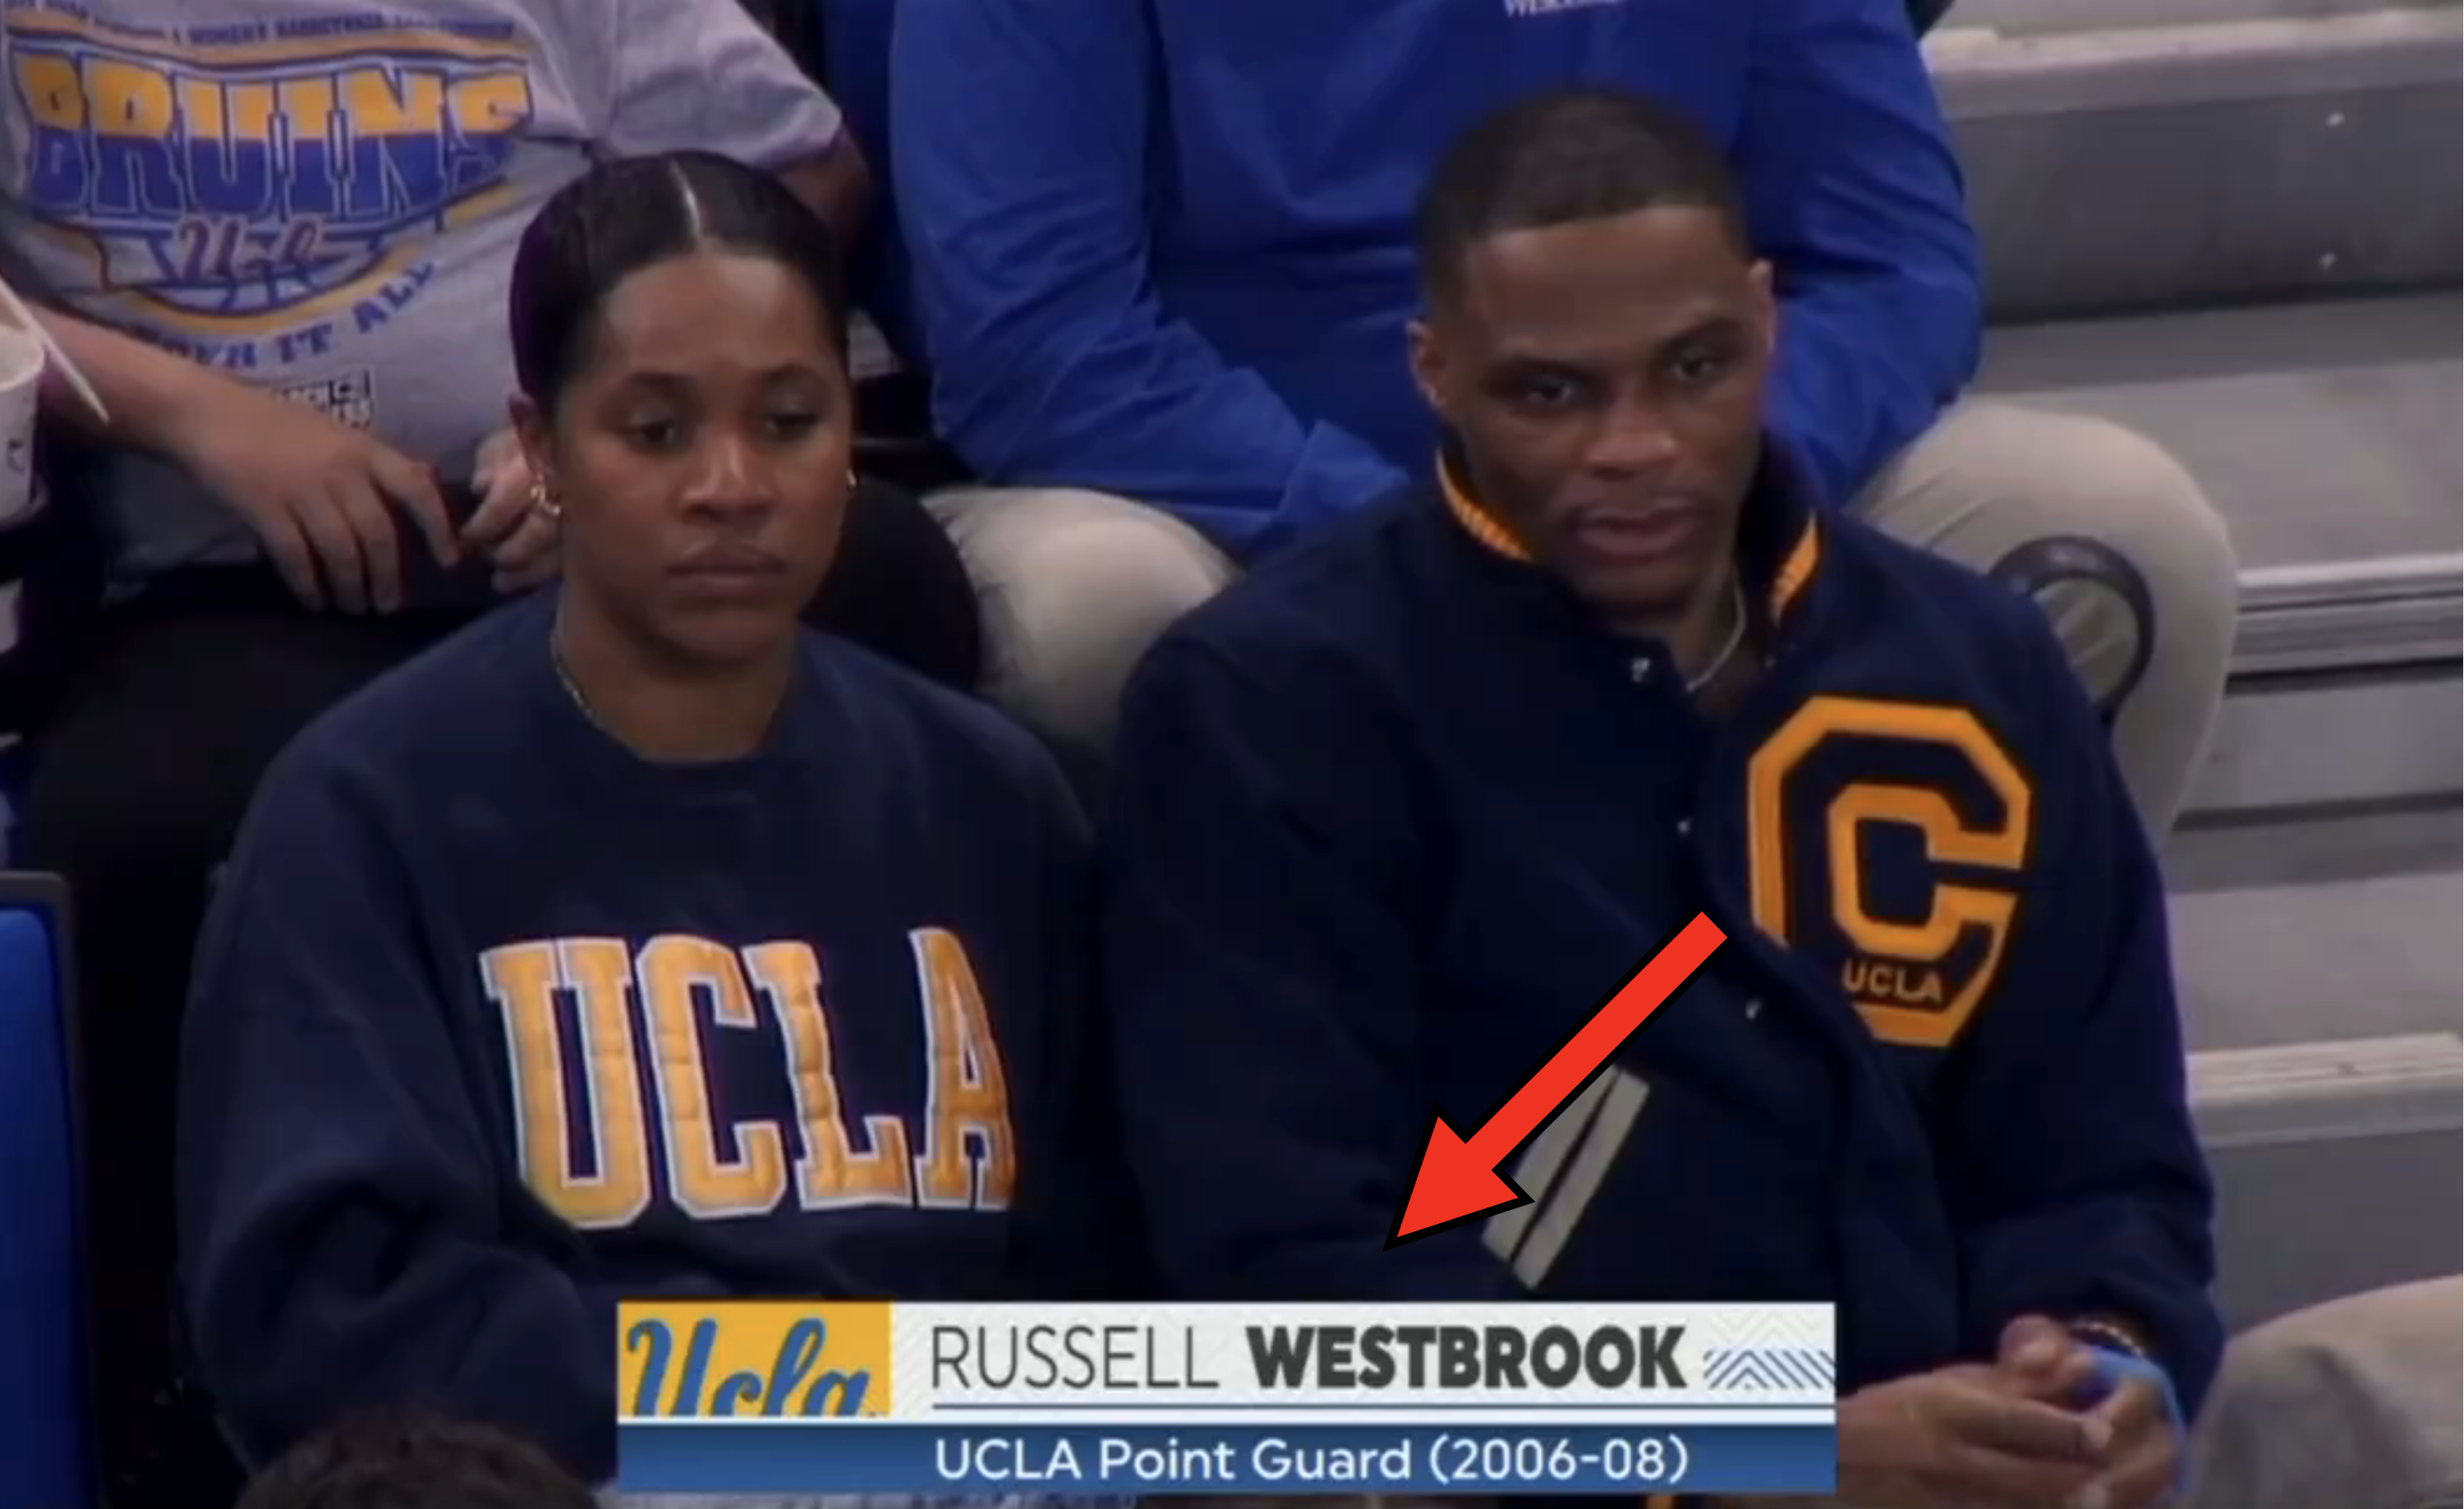 Russell Westbrook and companion sitting courtside, wearing UCLA sweatshirts. Text overlay identifies him as a former UCLA point guard